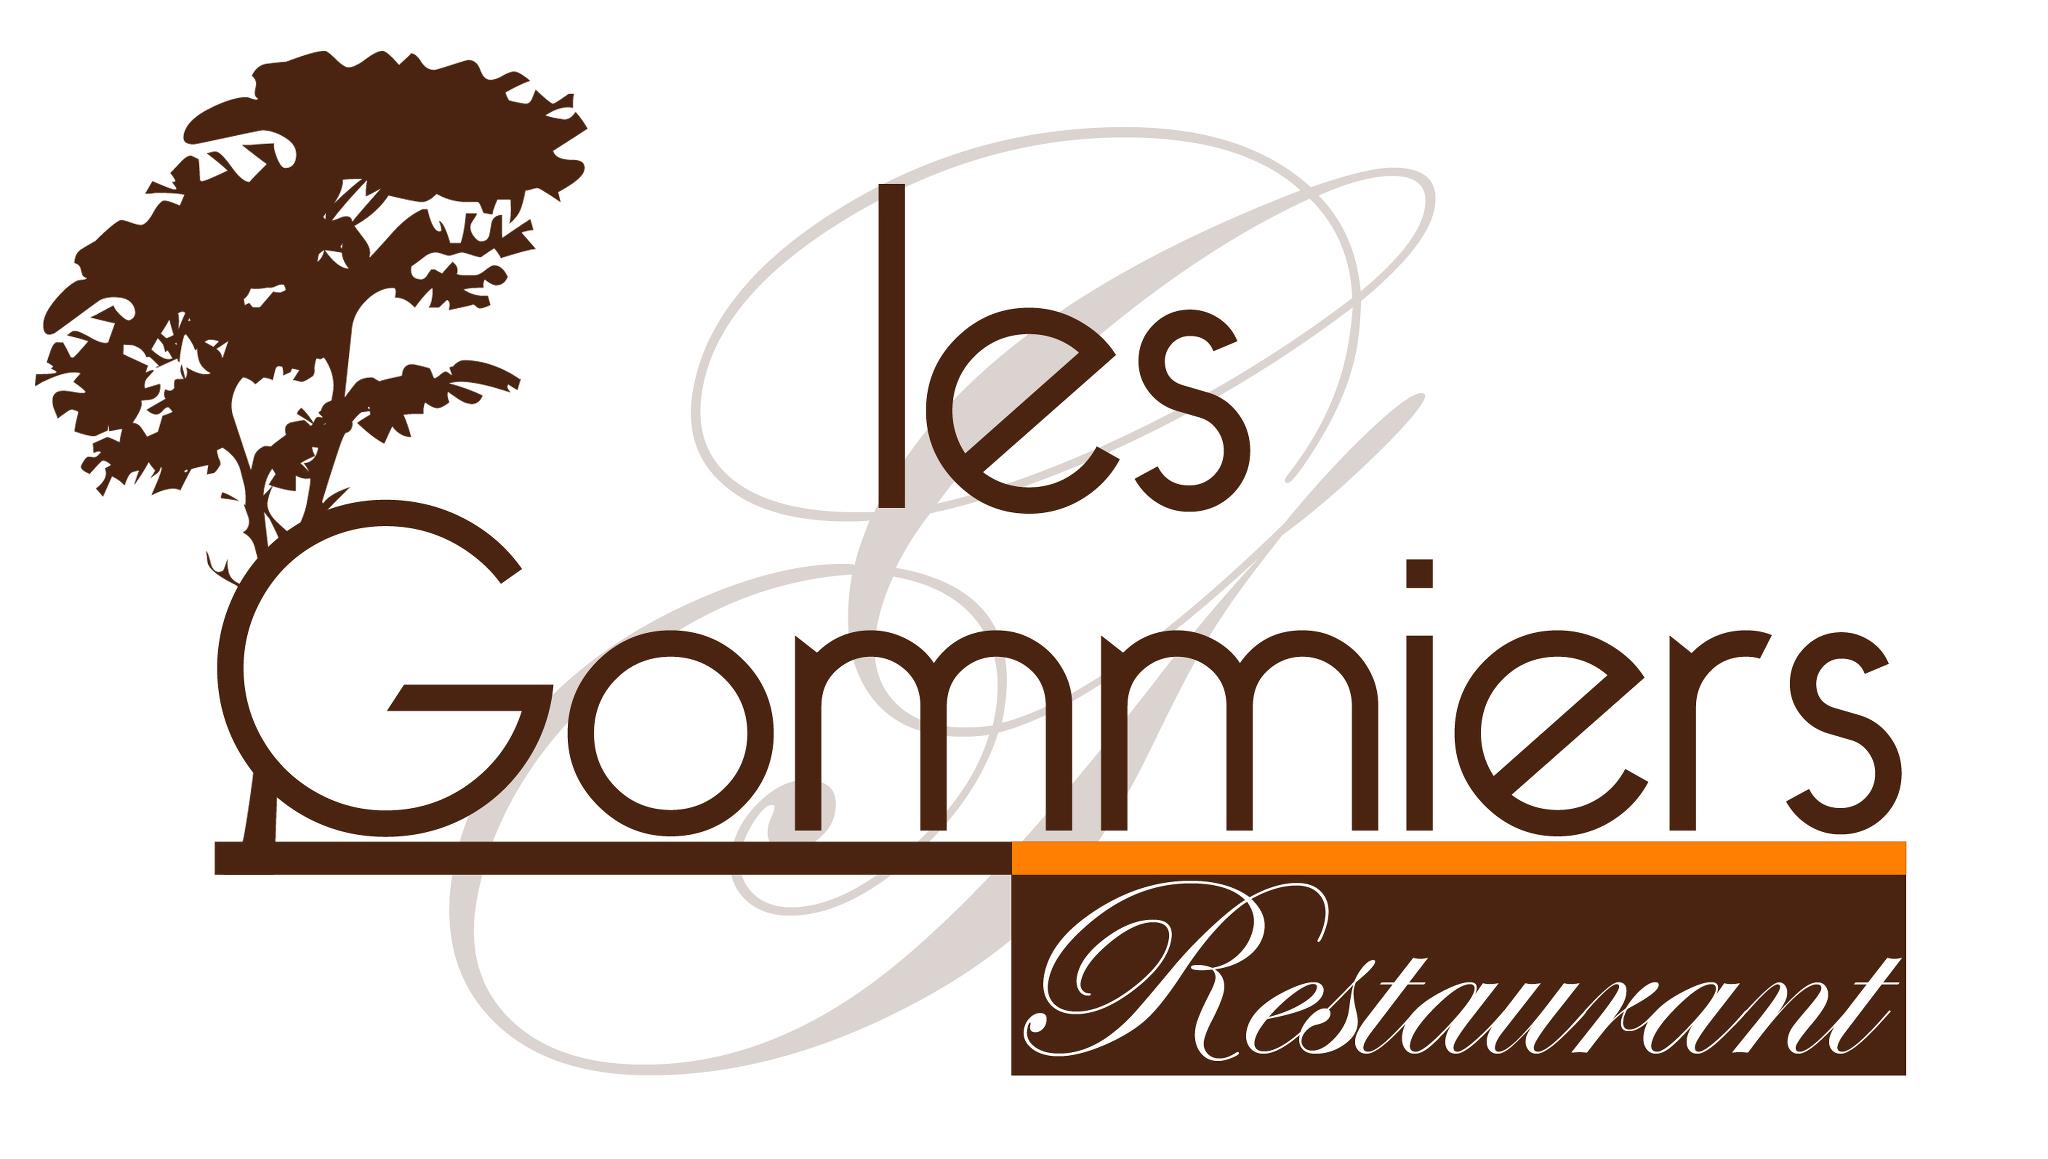 LES GOMMIERS Offer  as OfferTitleFR
			, 